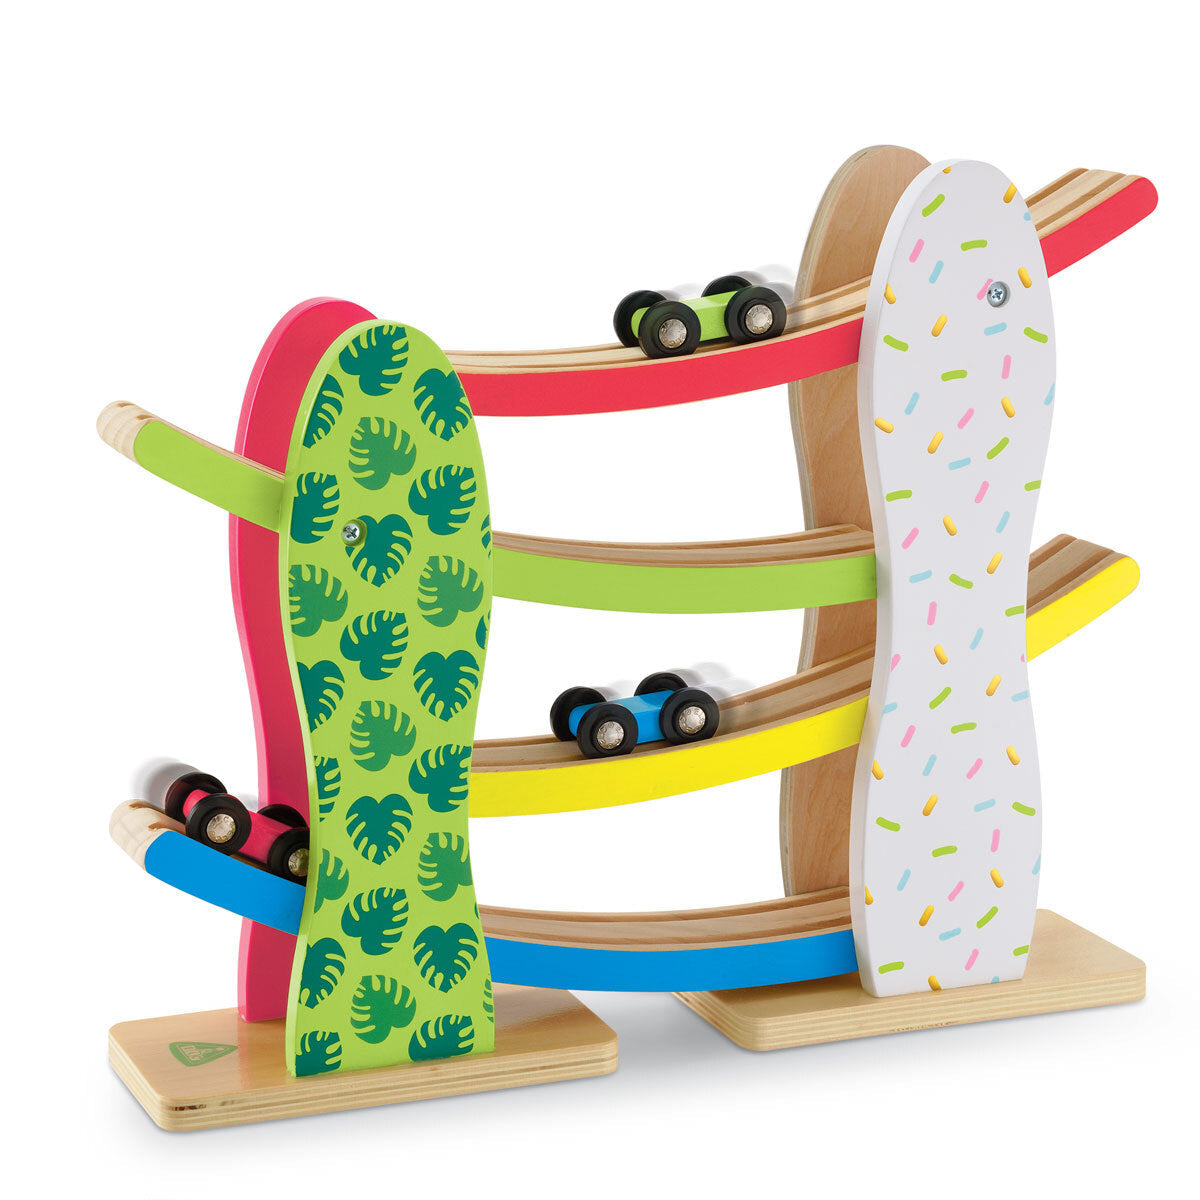 Early Learning Centre Wooden Click Clack Track